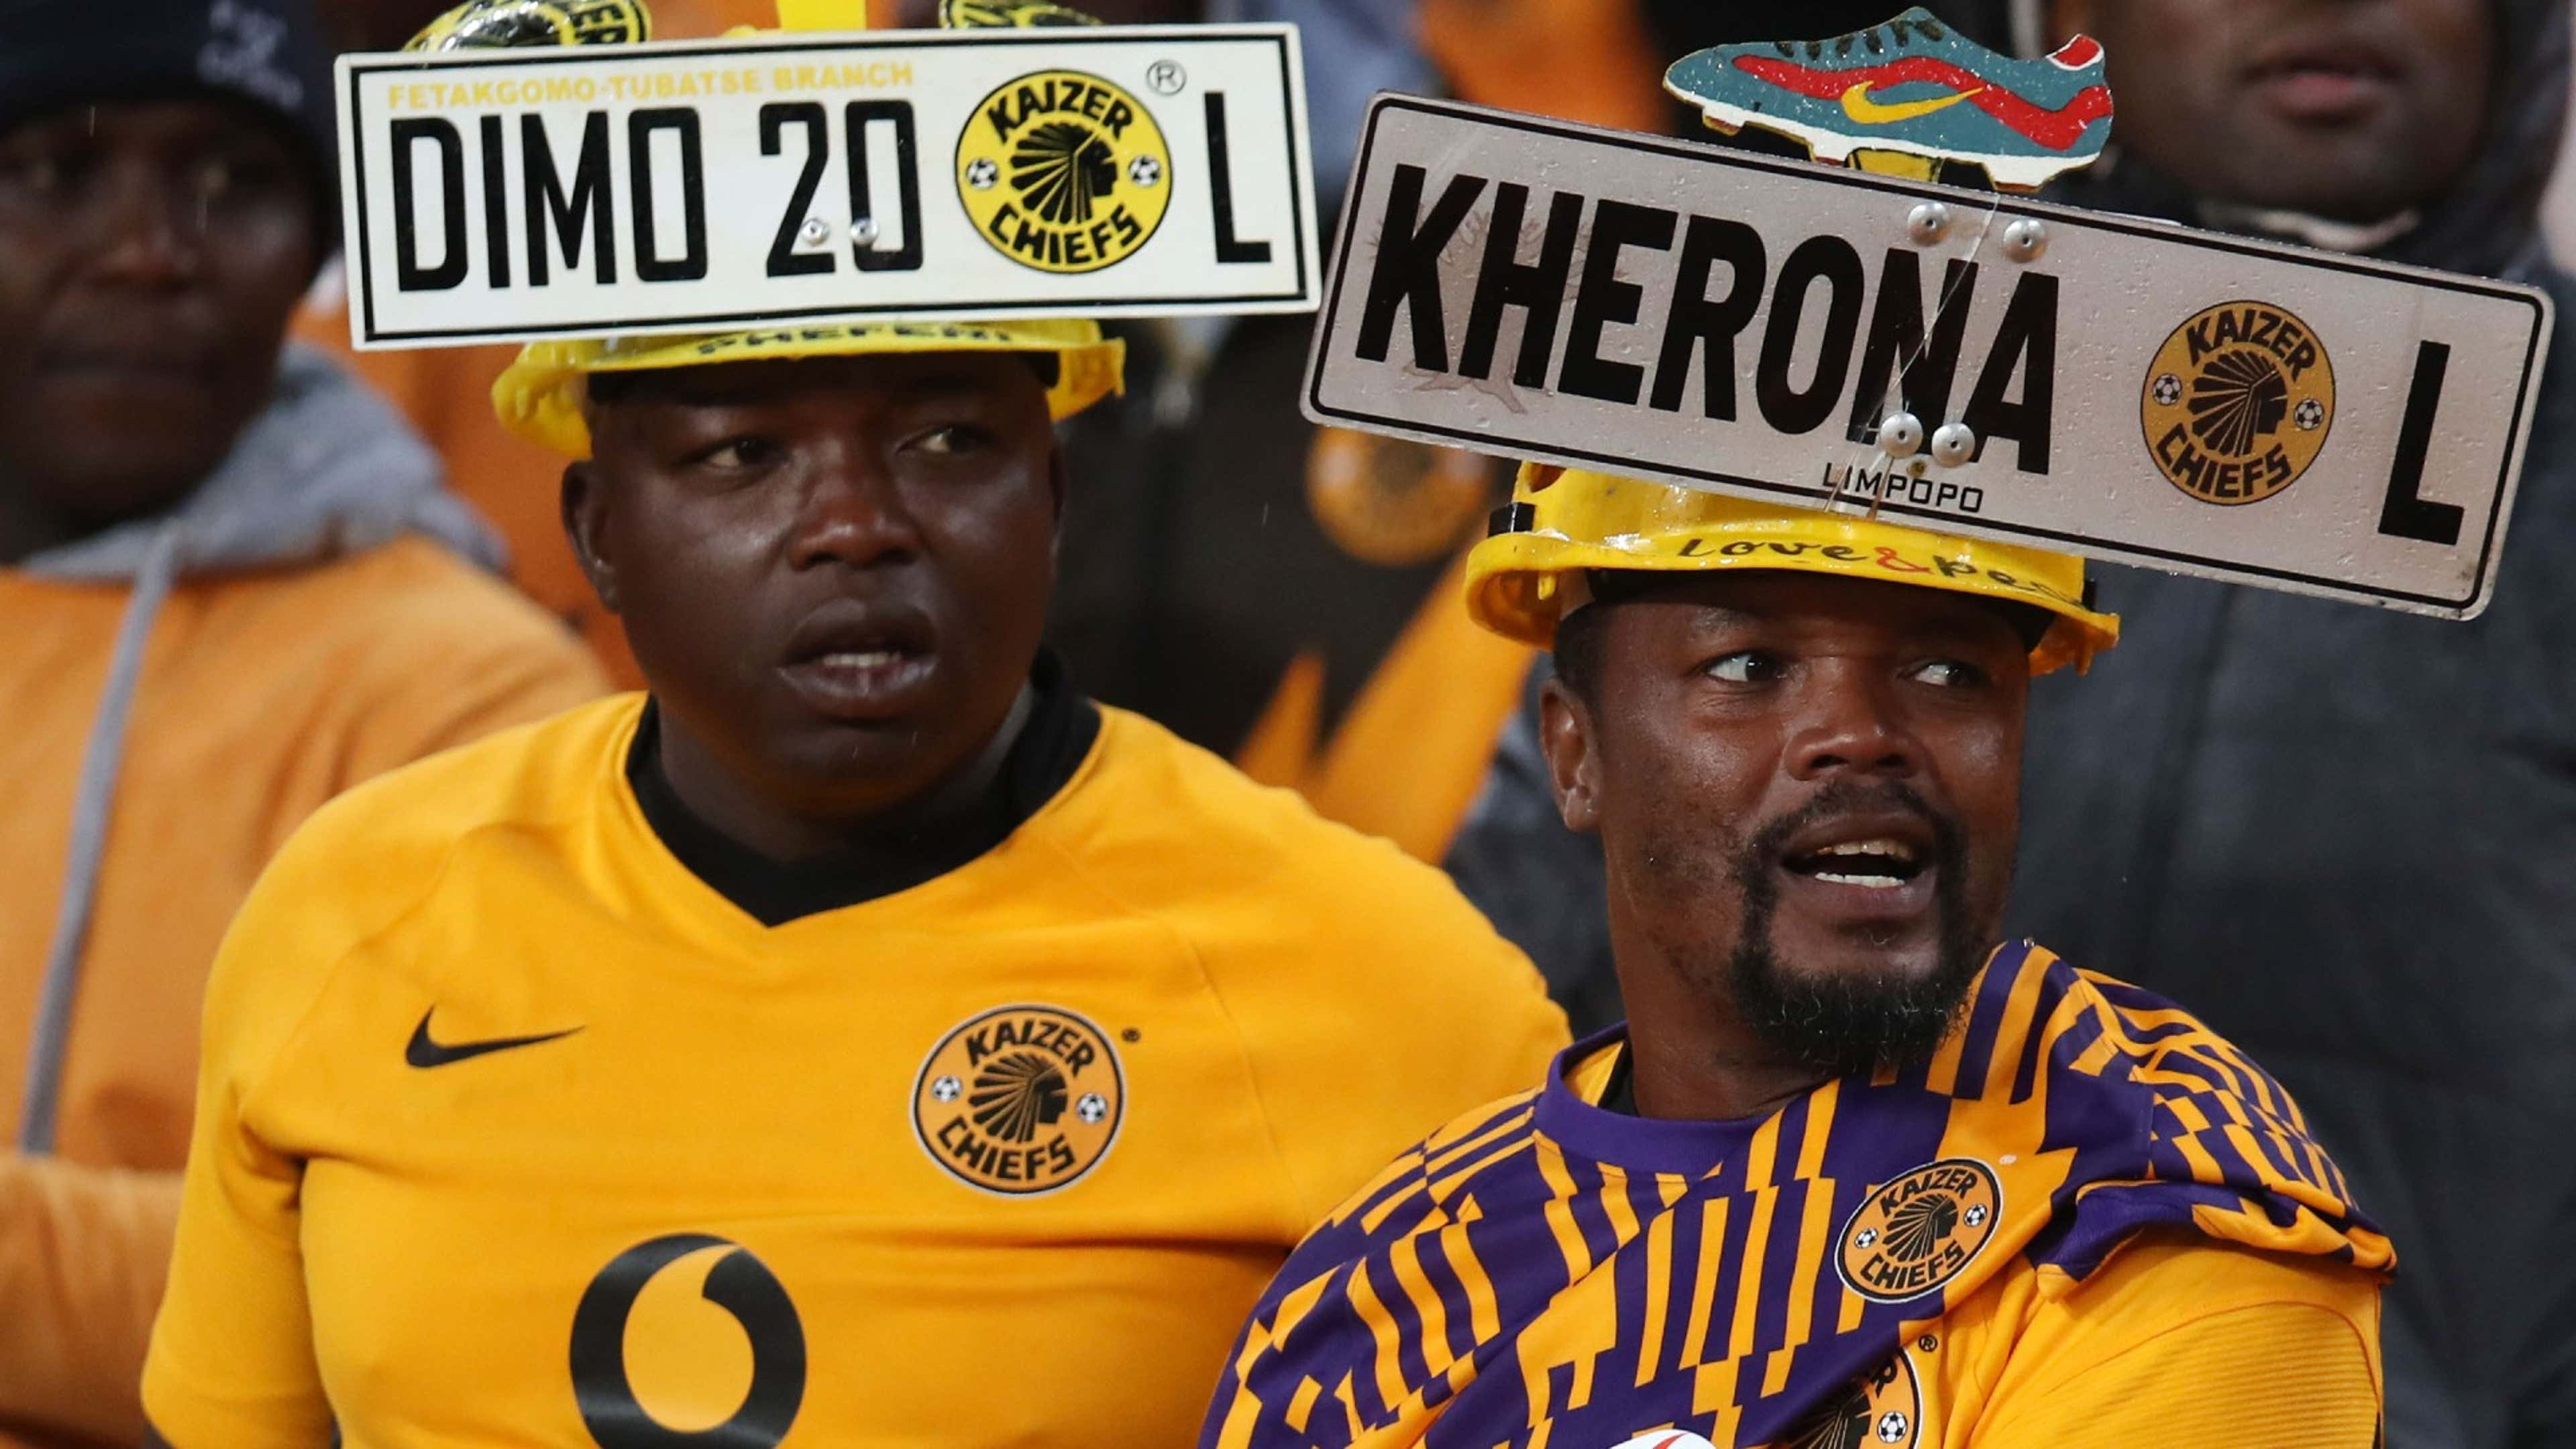 Kaizer Chiefs - New jersey number 11 #Amakhosi4Life